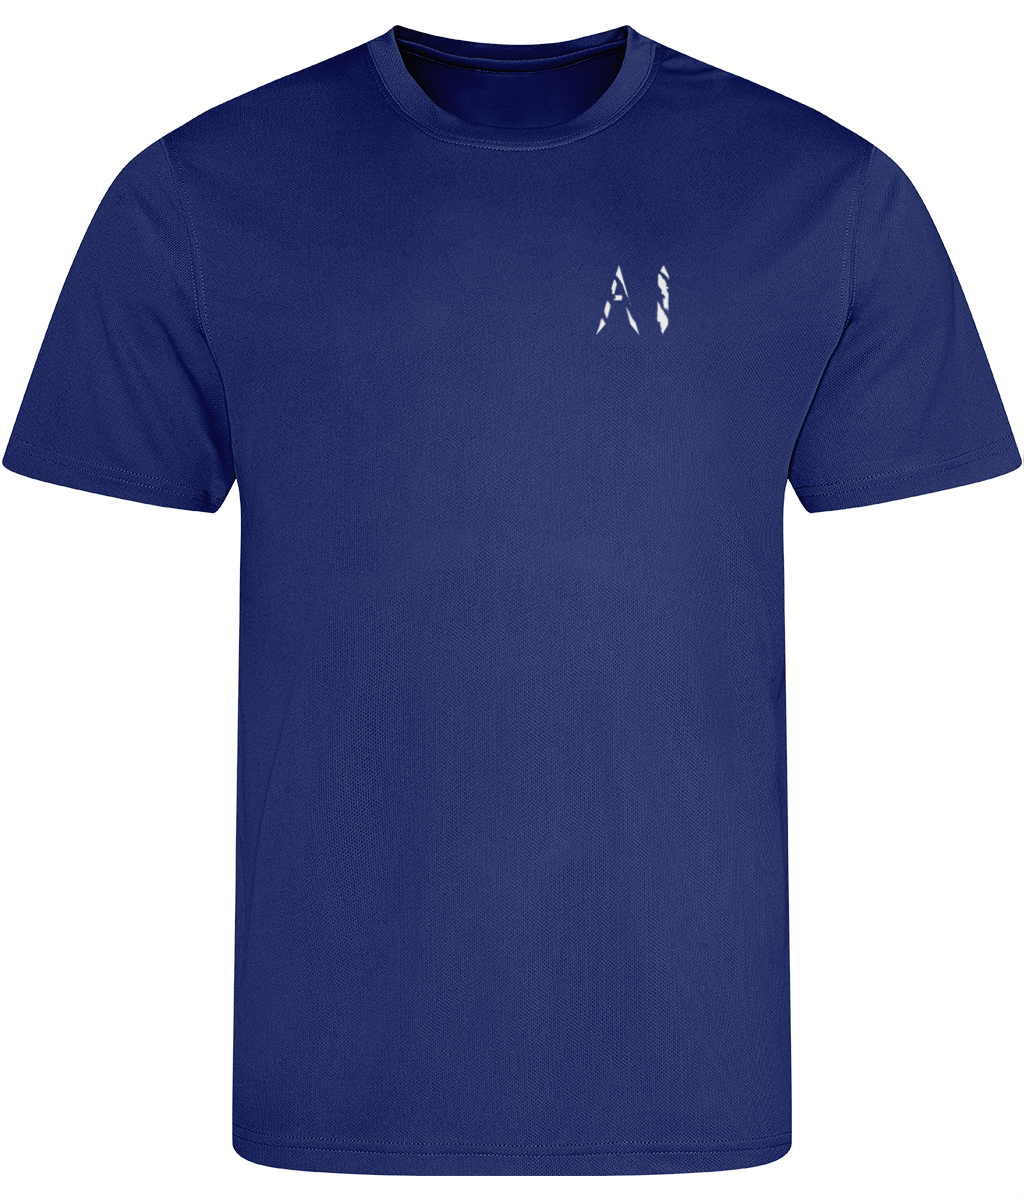 Mens dark blue Athletic Sports Shirt with white AI logo on the left chest